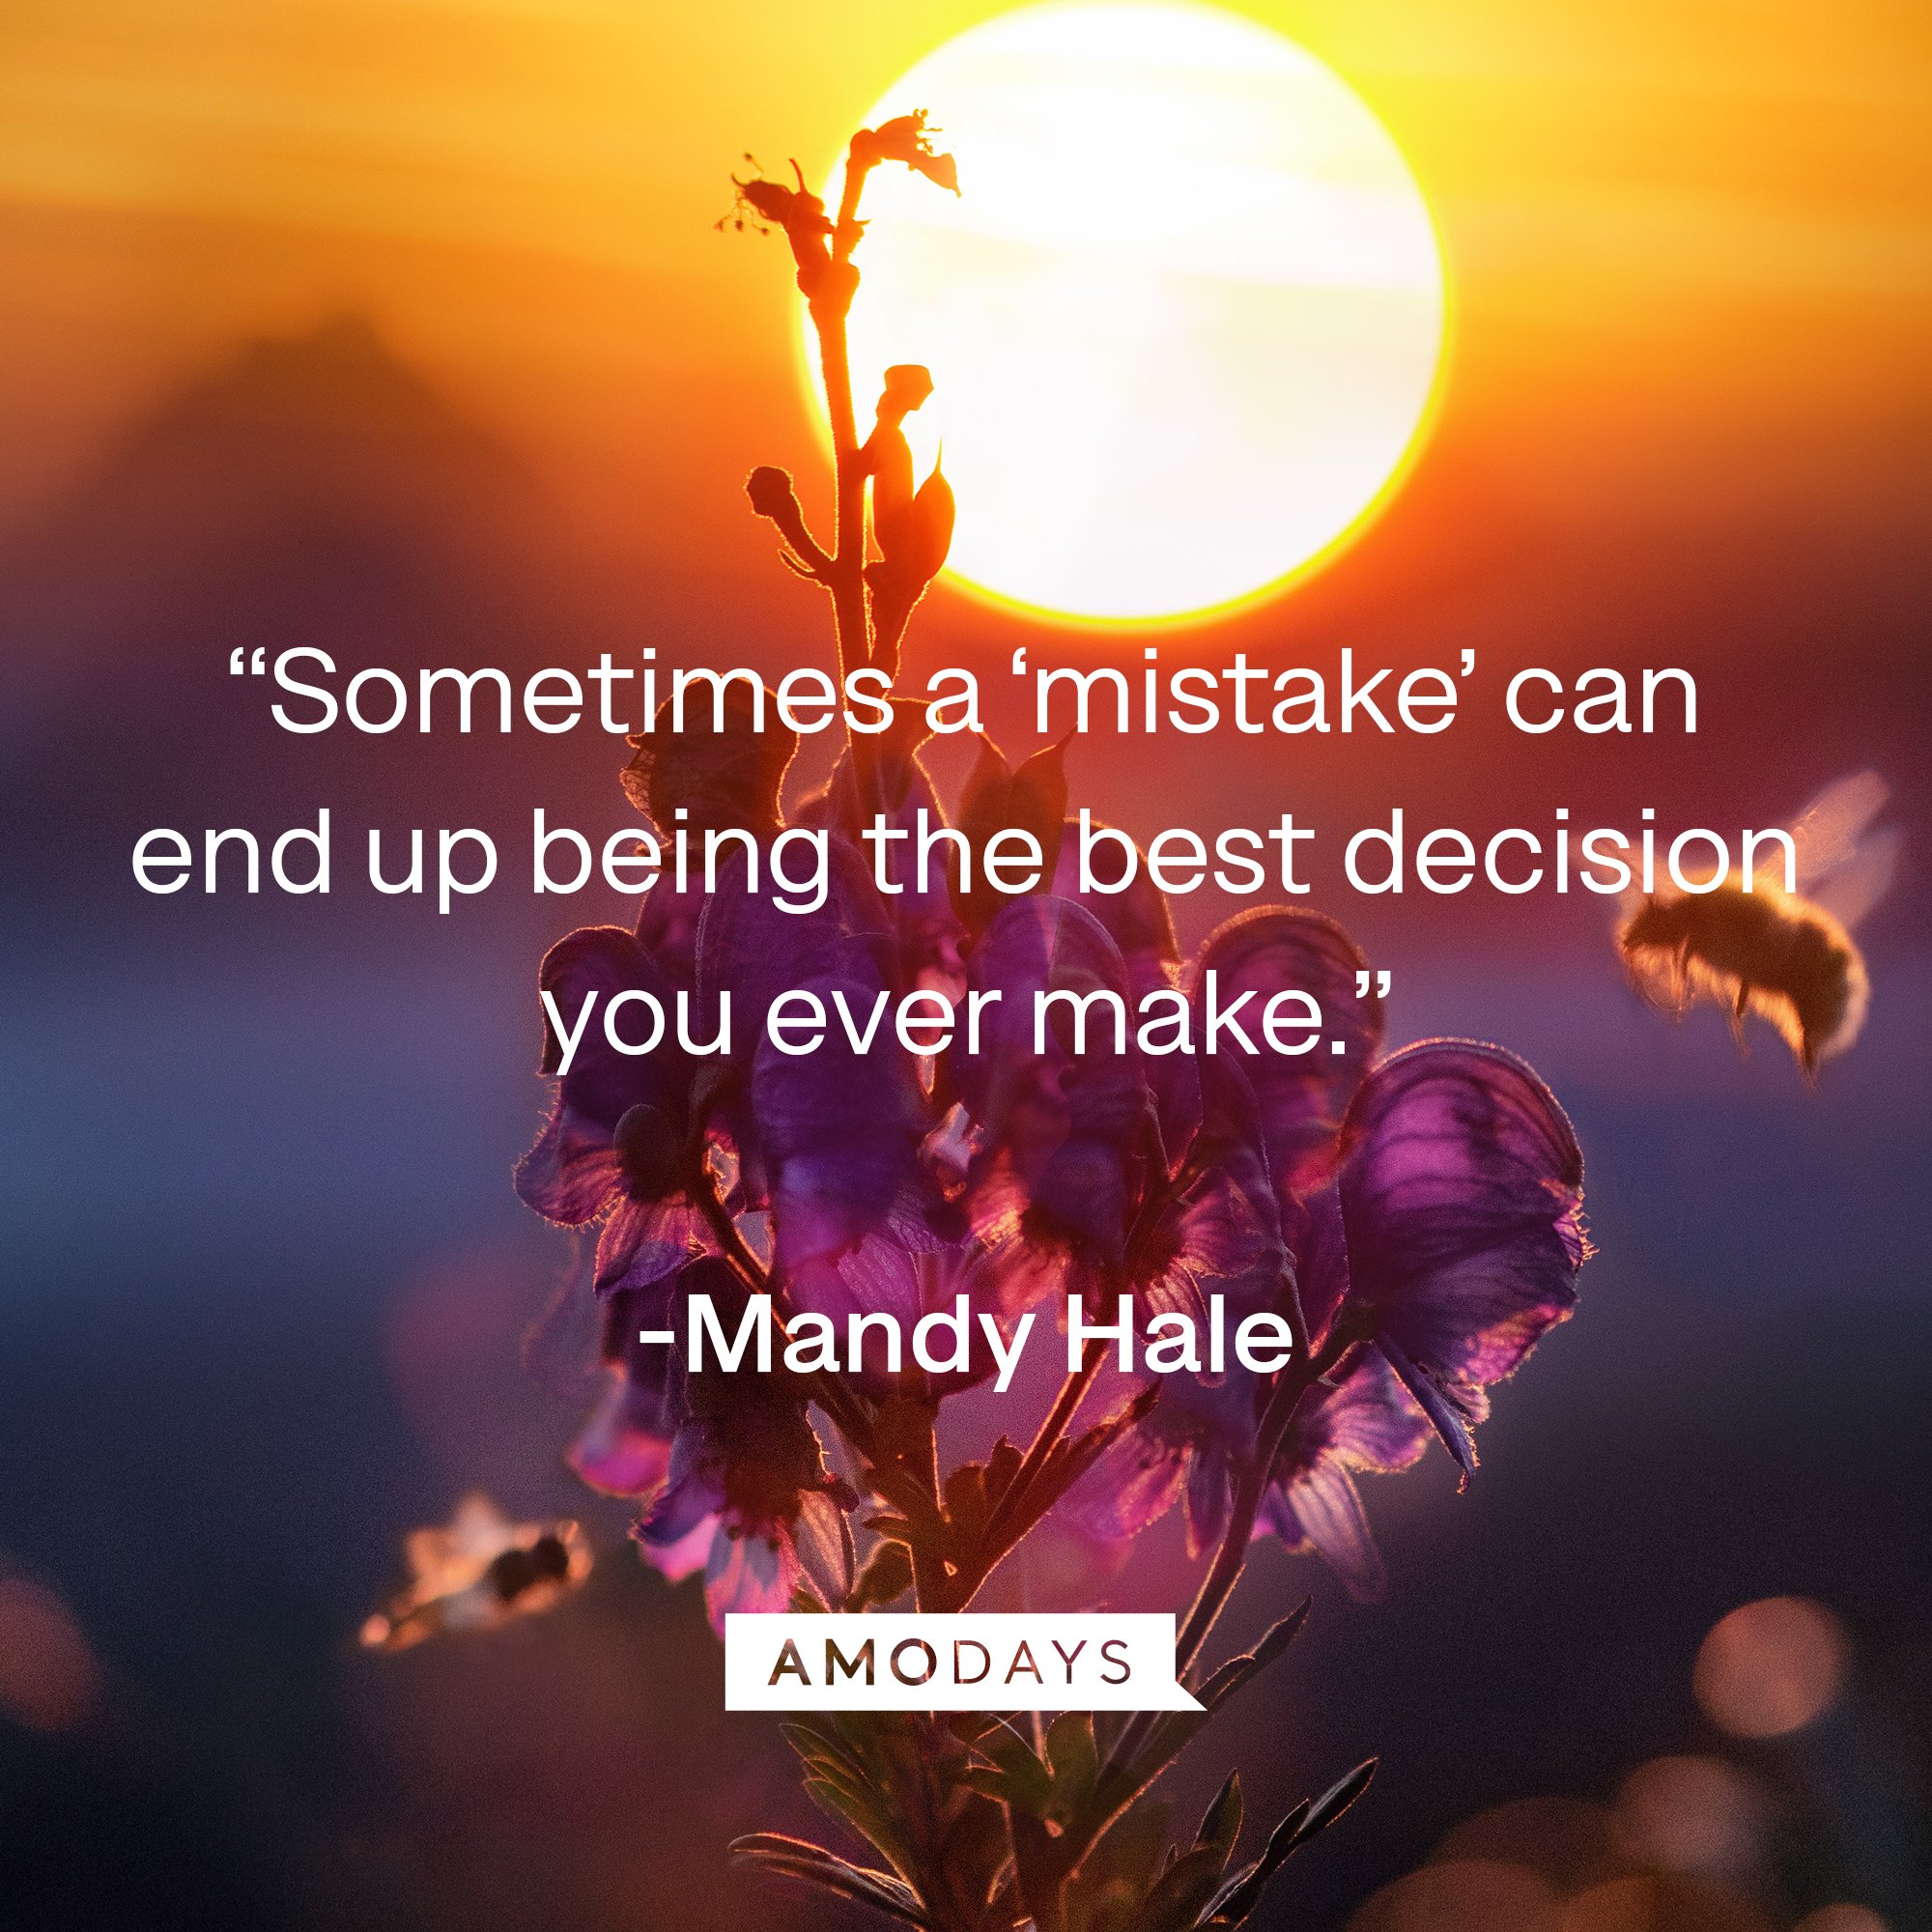  Mandy Hale's quote: “Sometimes a ‘mistake’ can end up being the best decision you ever make.”  | Image: AmoDays